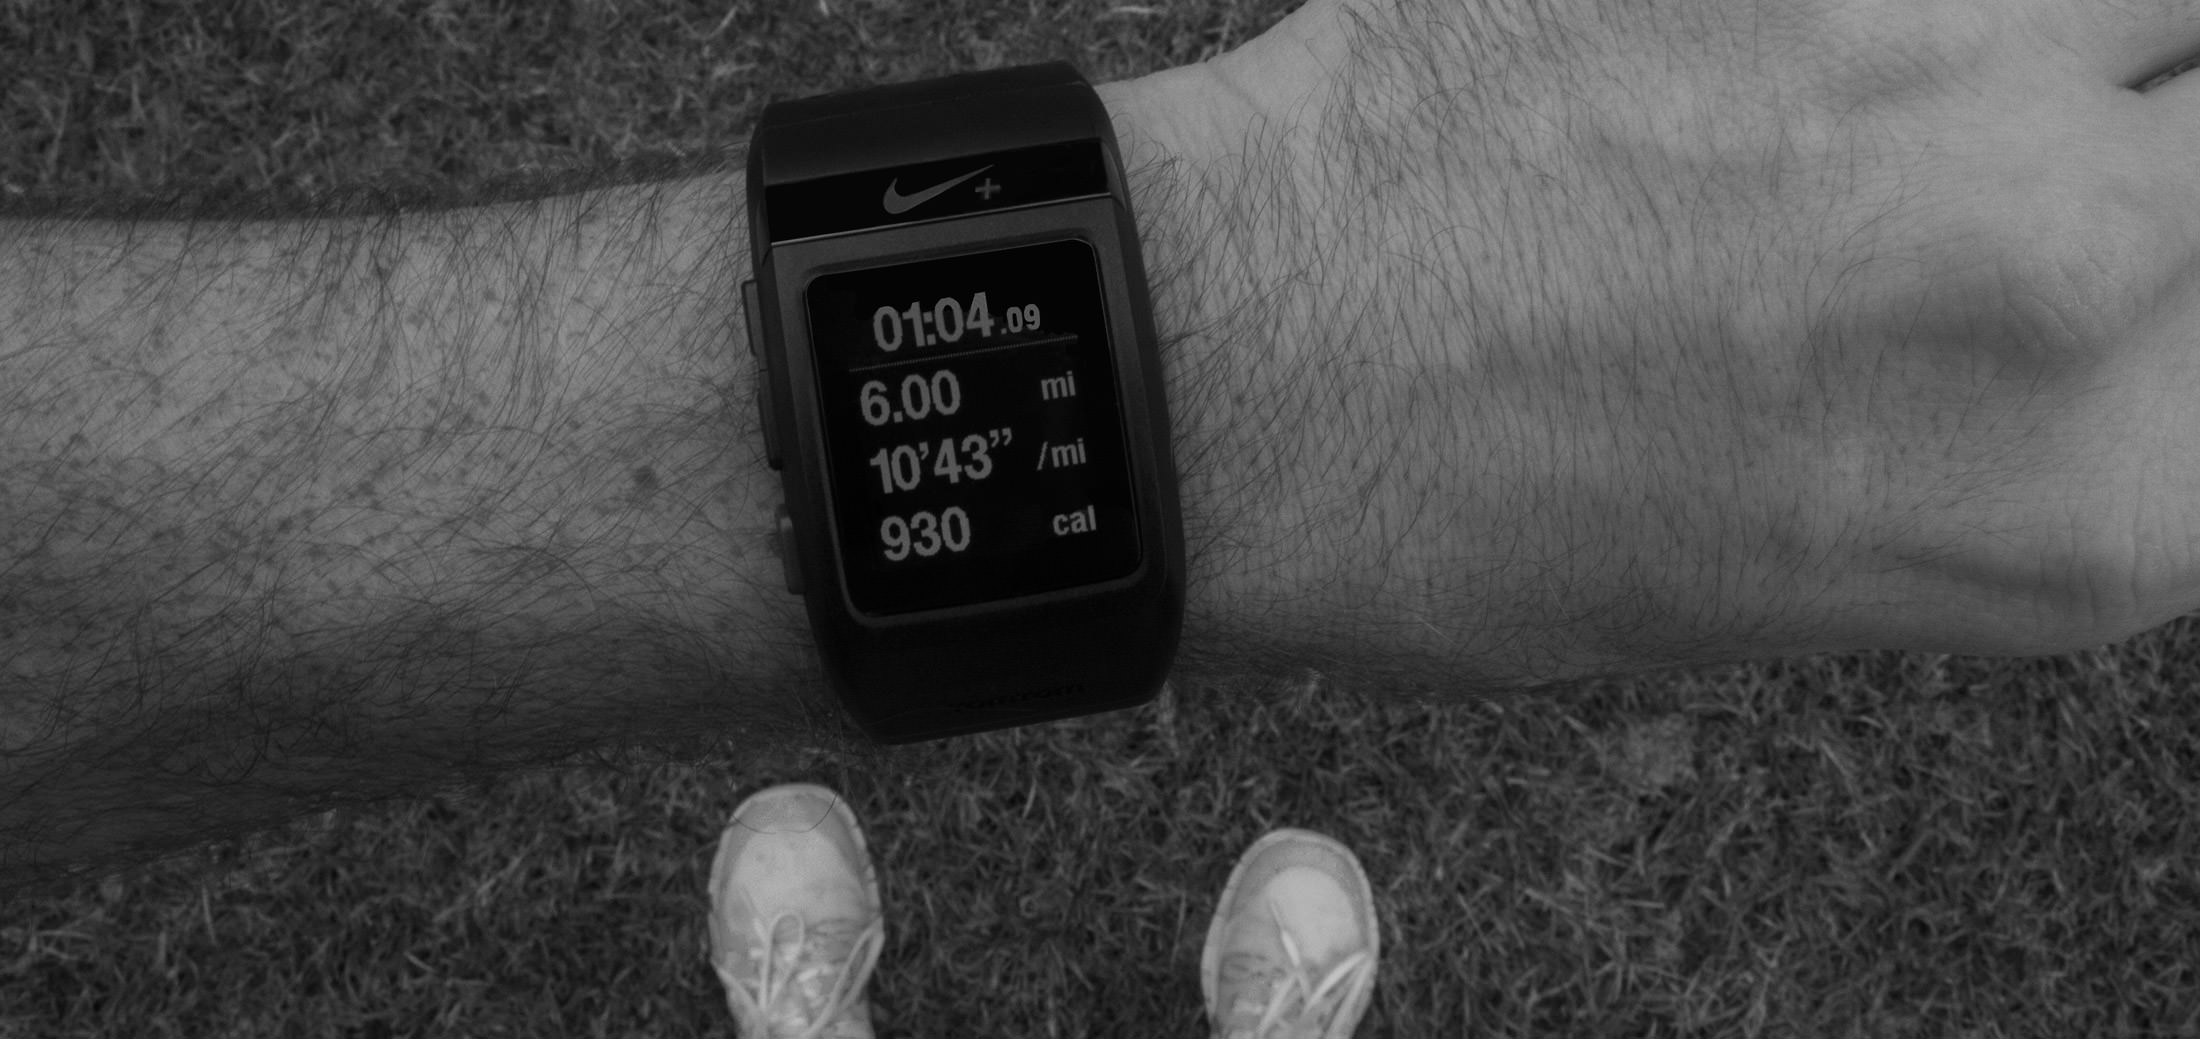 An image of the watch I used to capture my running data.